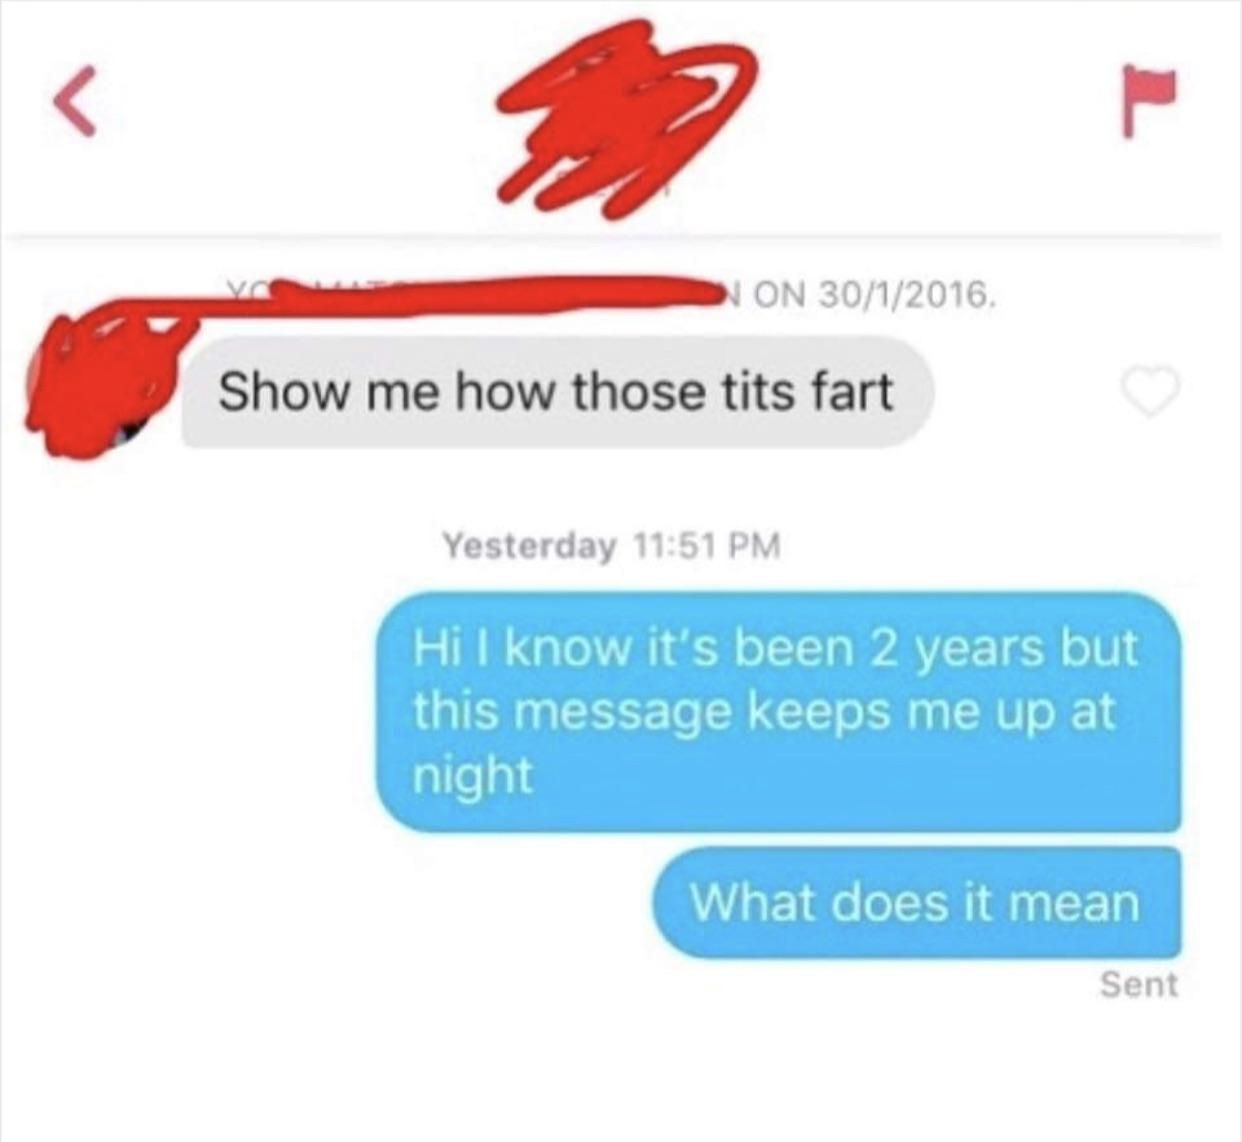 If any of you guys know how to make tits fart, please let me know. I need to learn this skill.